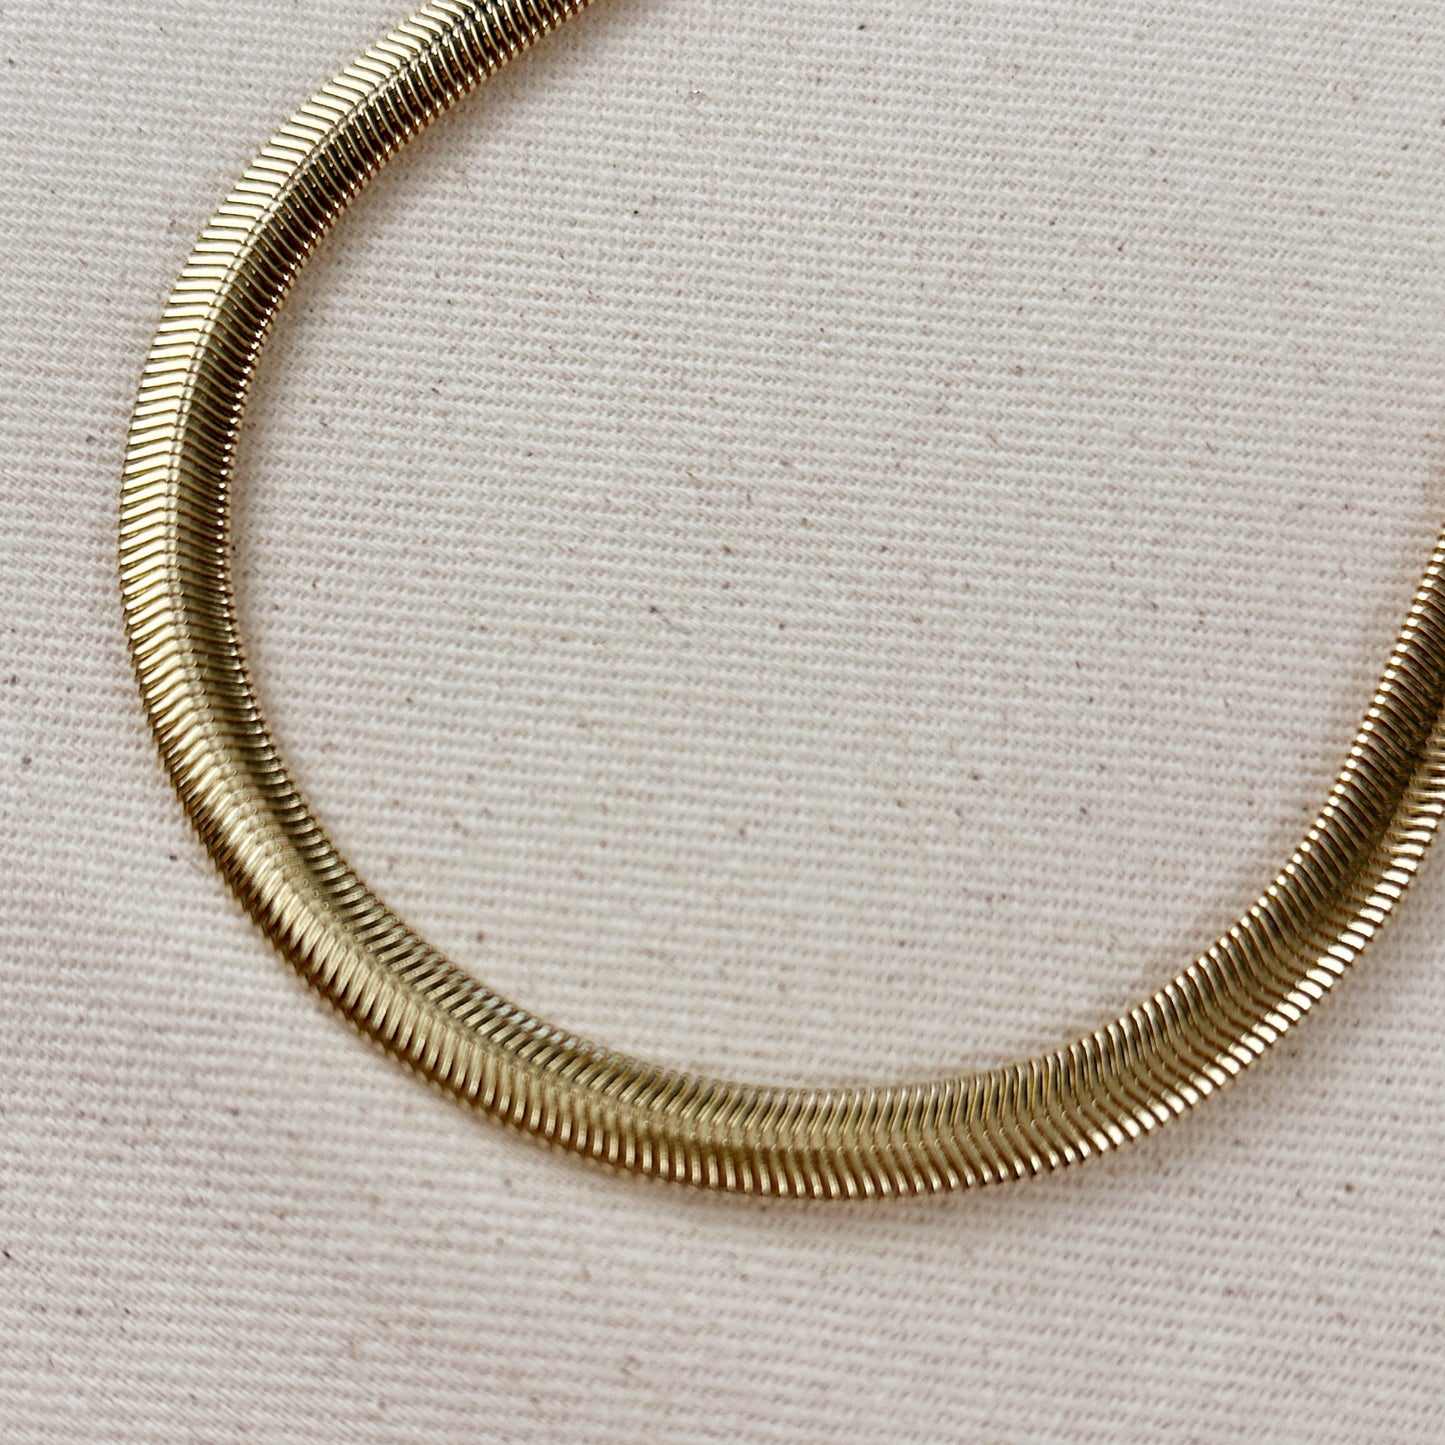 18k Gold Filled 8mm Fancy Thick Snake Chain Necklace